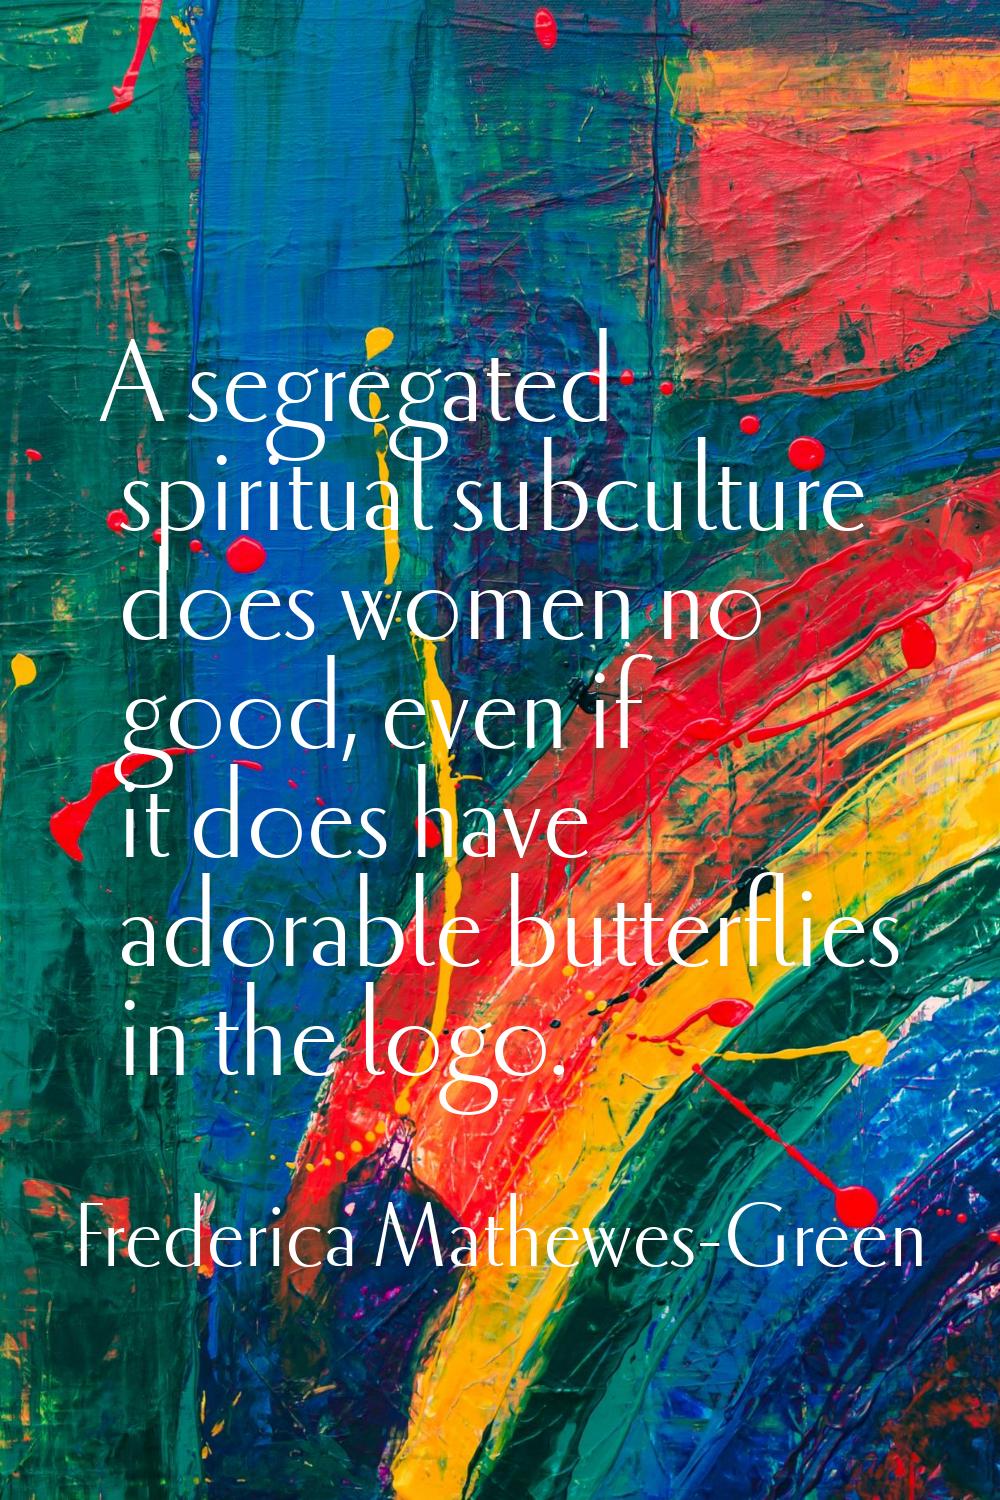 A segregated spiritual subculture does women no good, even if it does have adorable butterflies in 